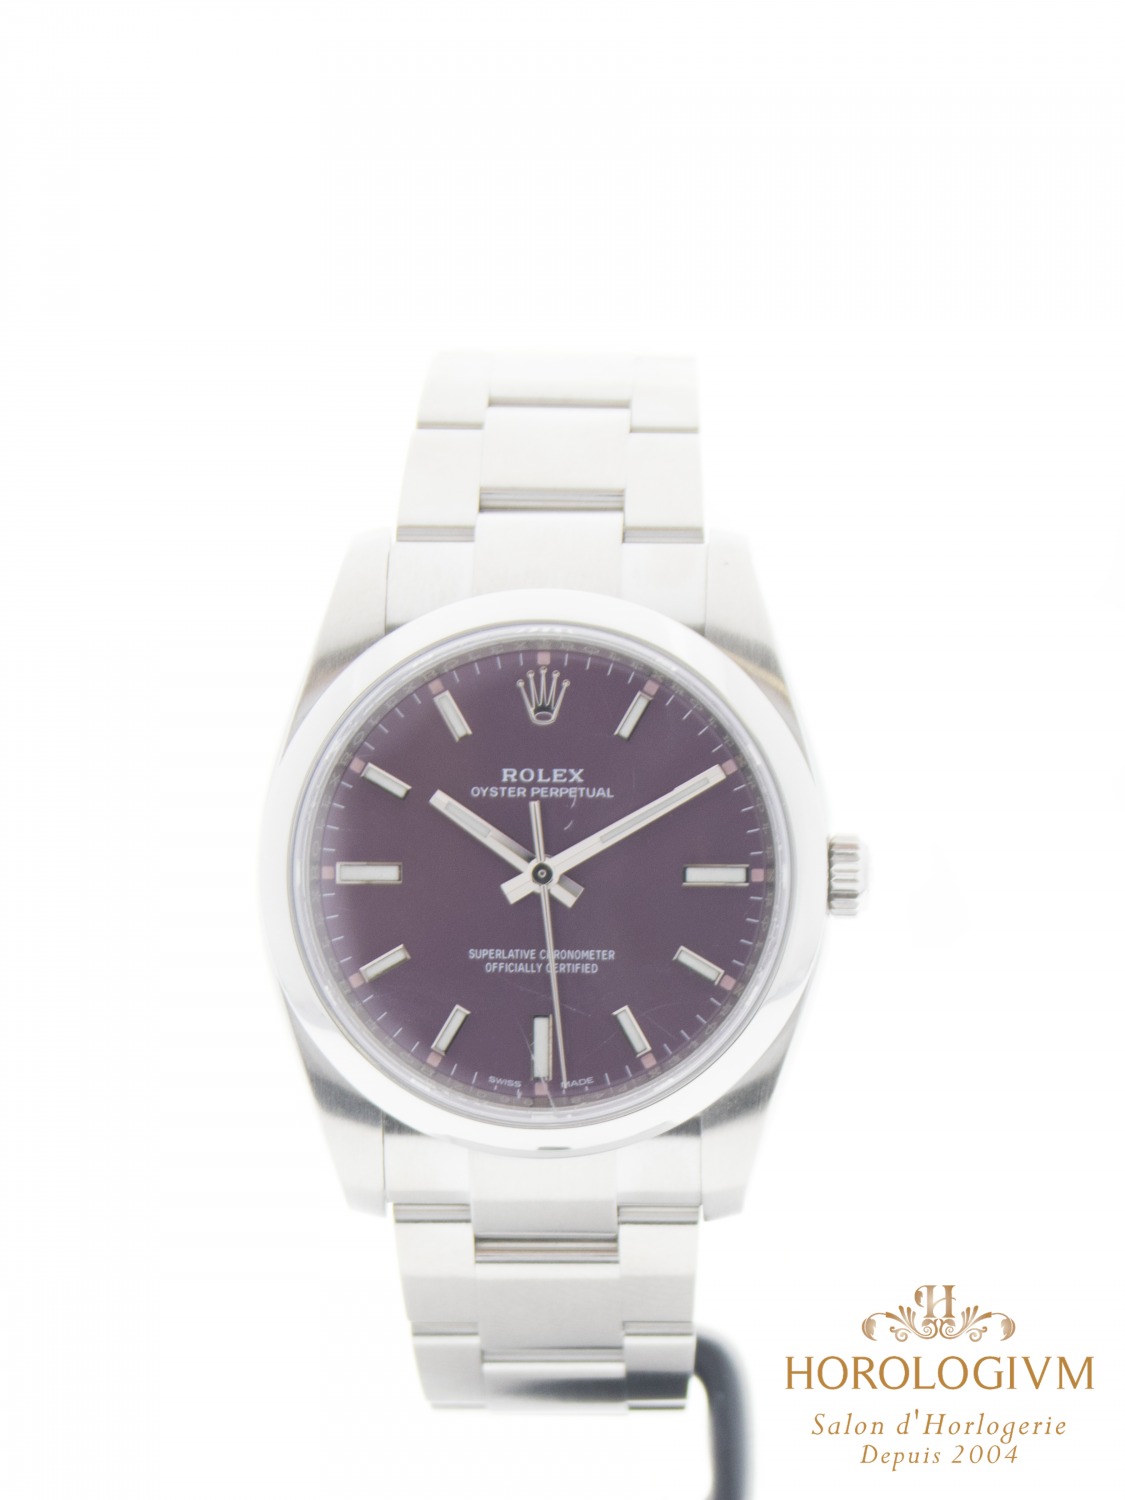 Rolex Oyster Perpetual 34 MM “Red Grape” Dial Ref. 114200 watch, silver